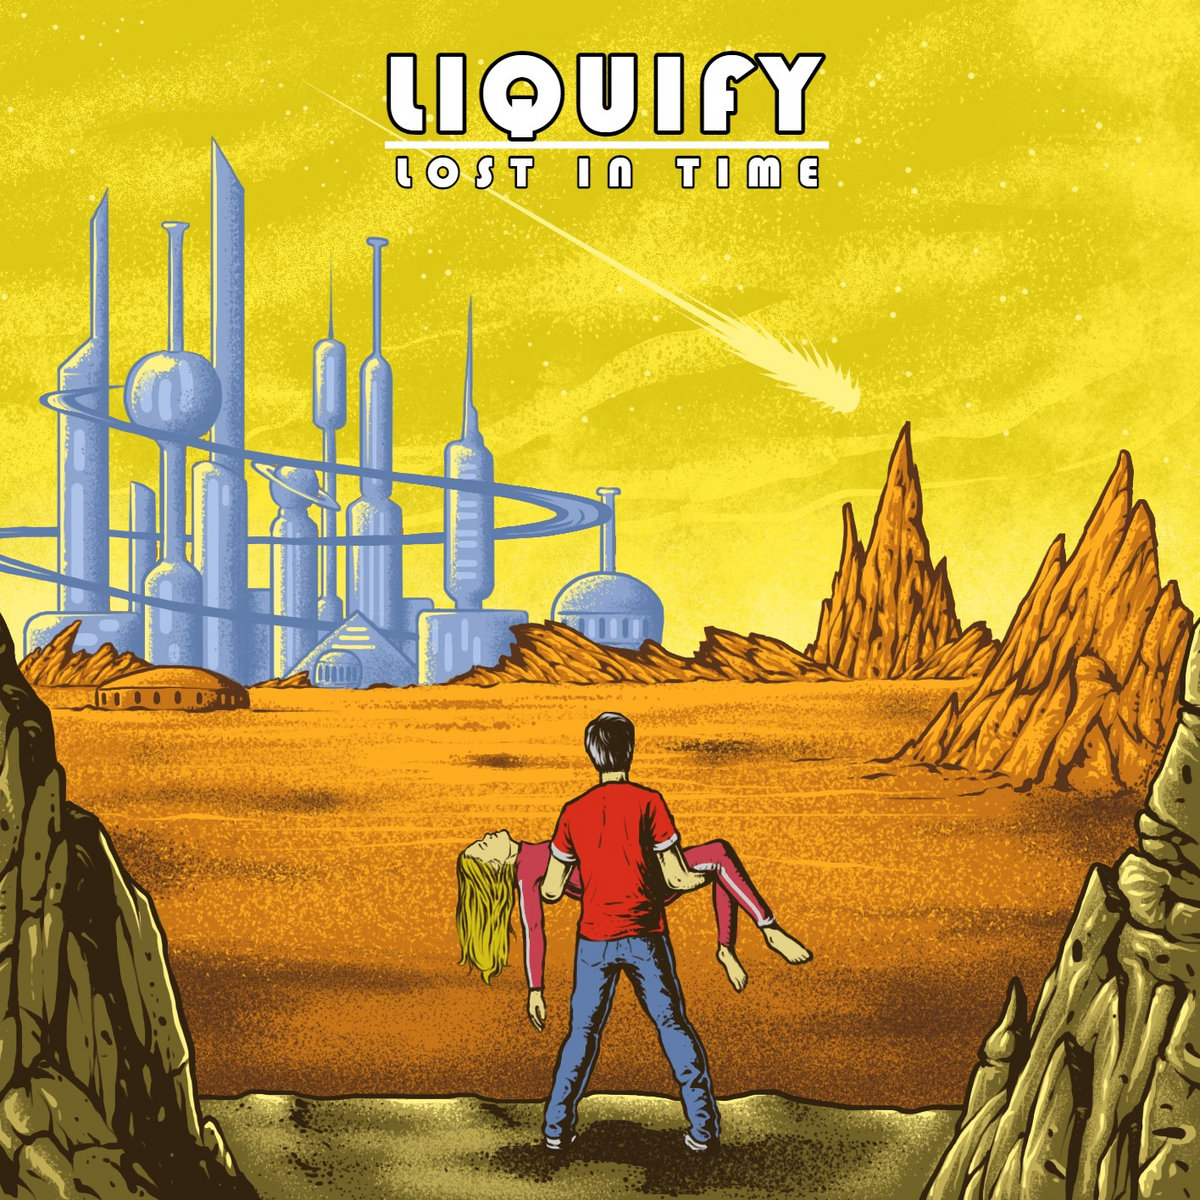 Liquify Release New Full-Length Lost in Time